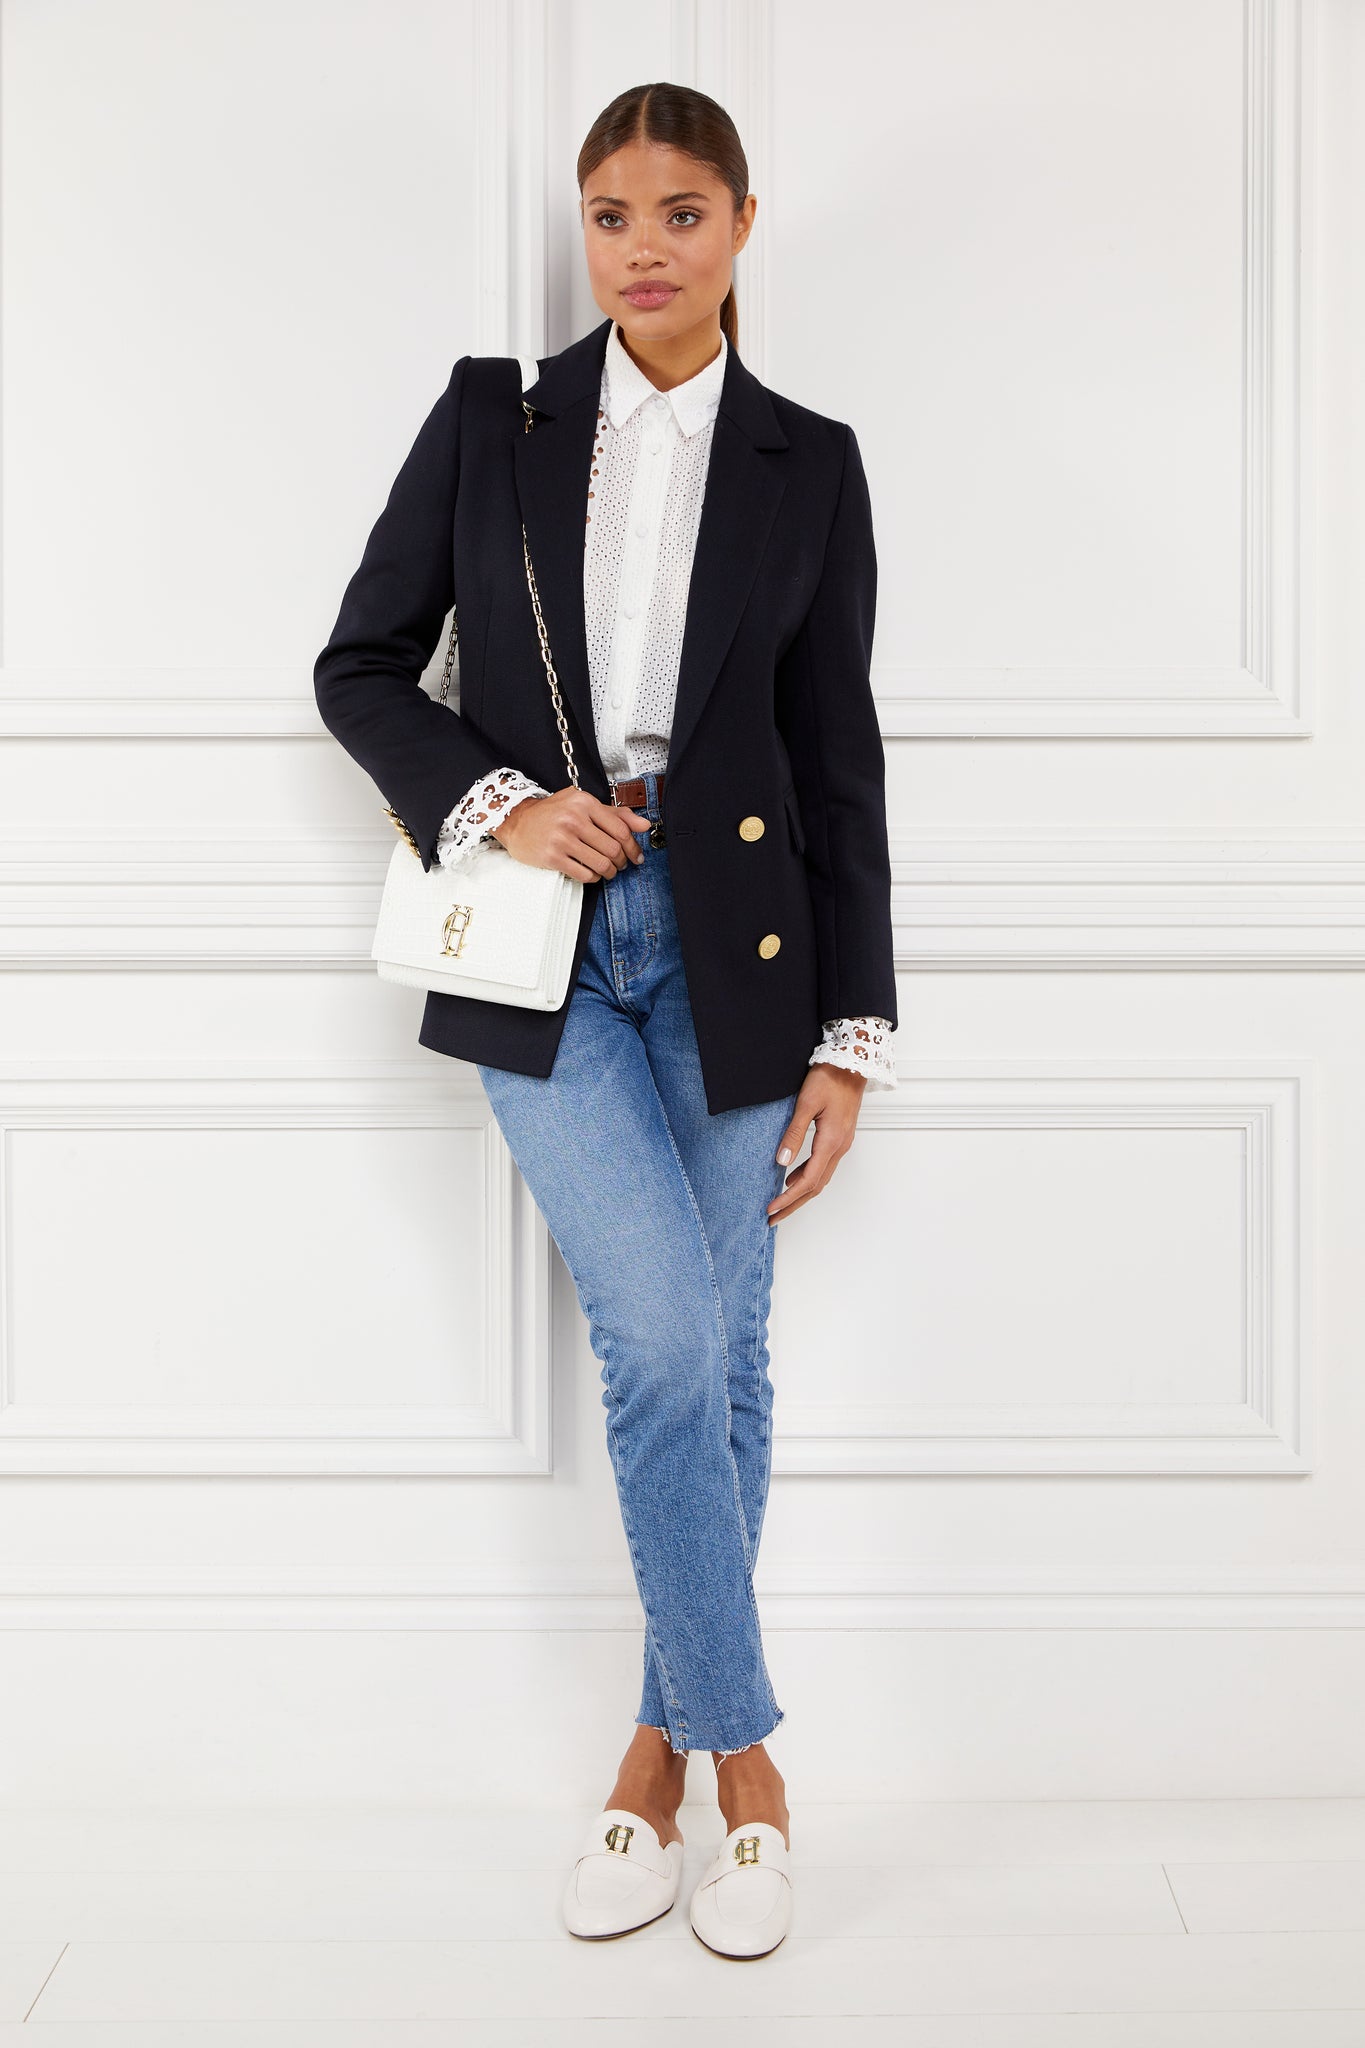 white leather backless loafers with a slightly pointed toe and gold hardware to the top worn with slim denim jeans, white broderie lace shits under a navy blazer with a white croc embossed leather clutch bag and gold chain strap